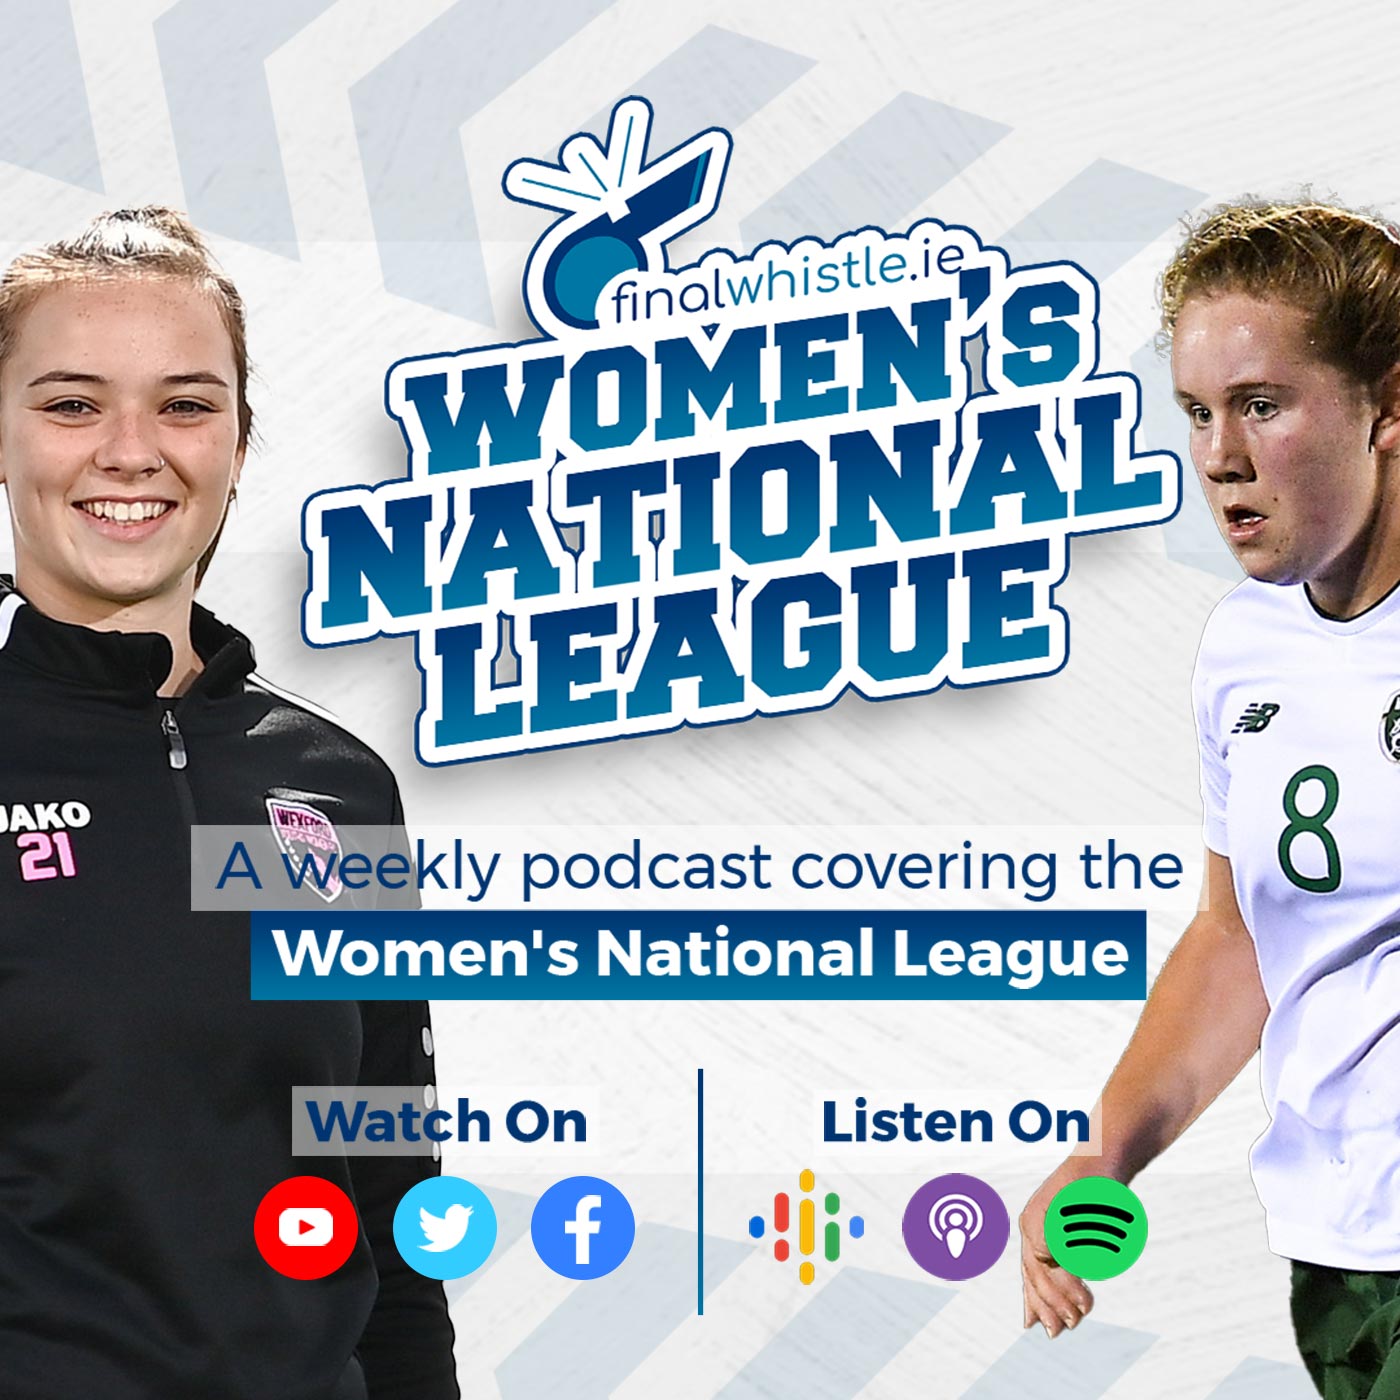 Artwork for podcast Final Whistle Women's National League